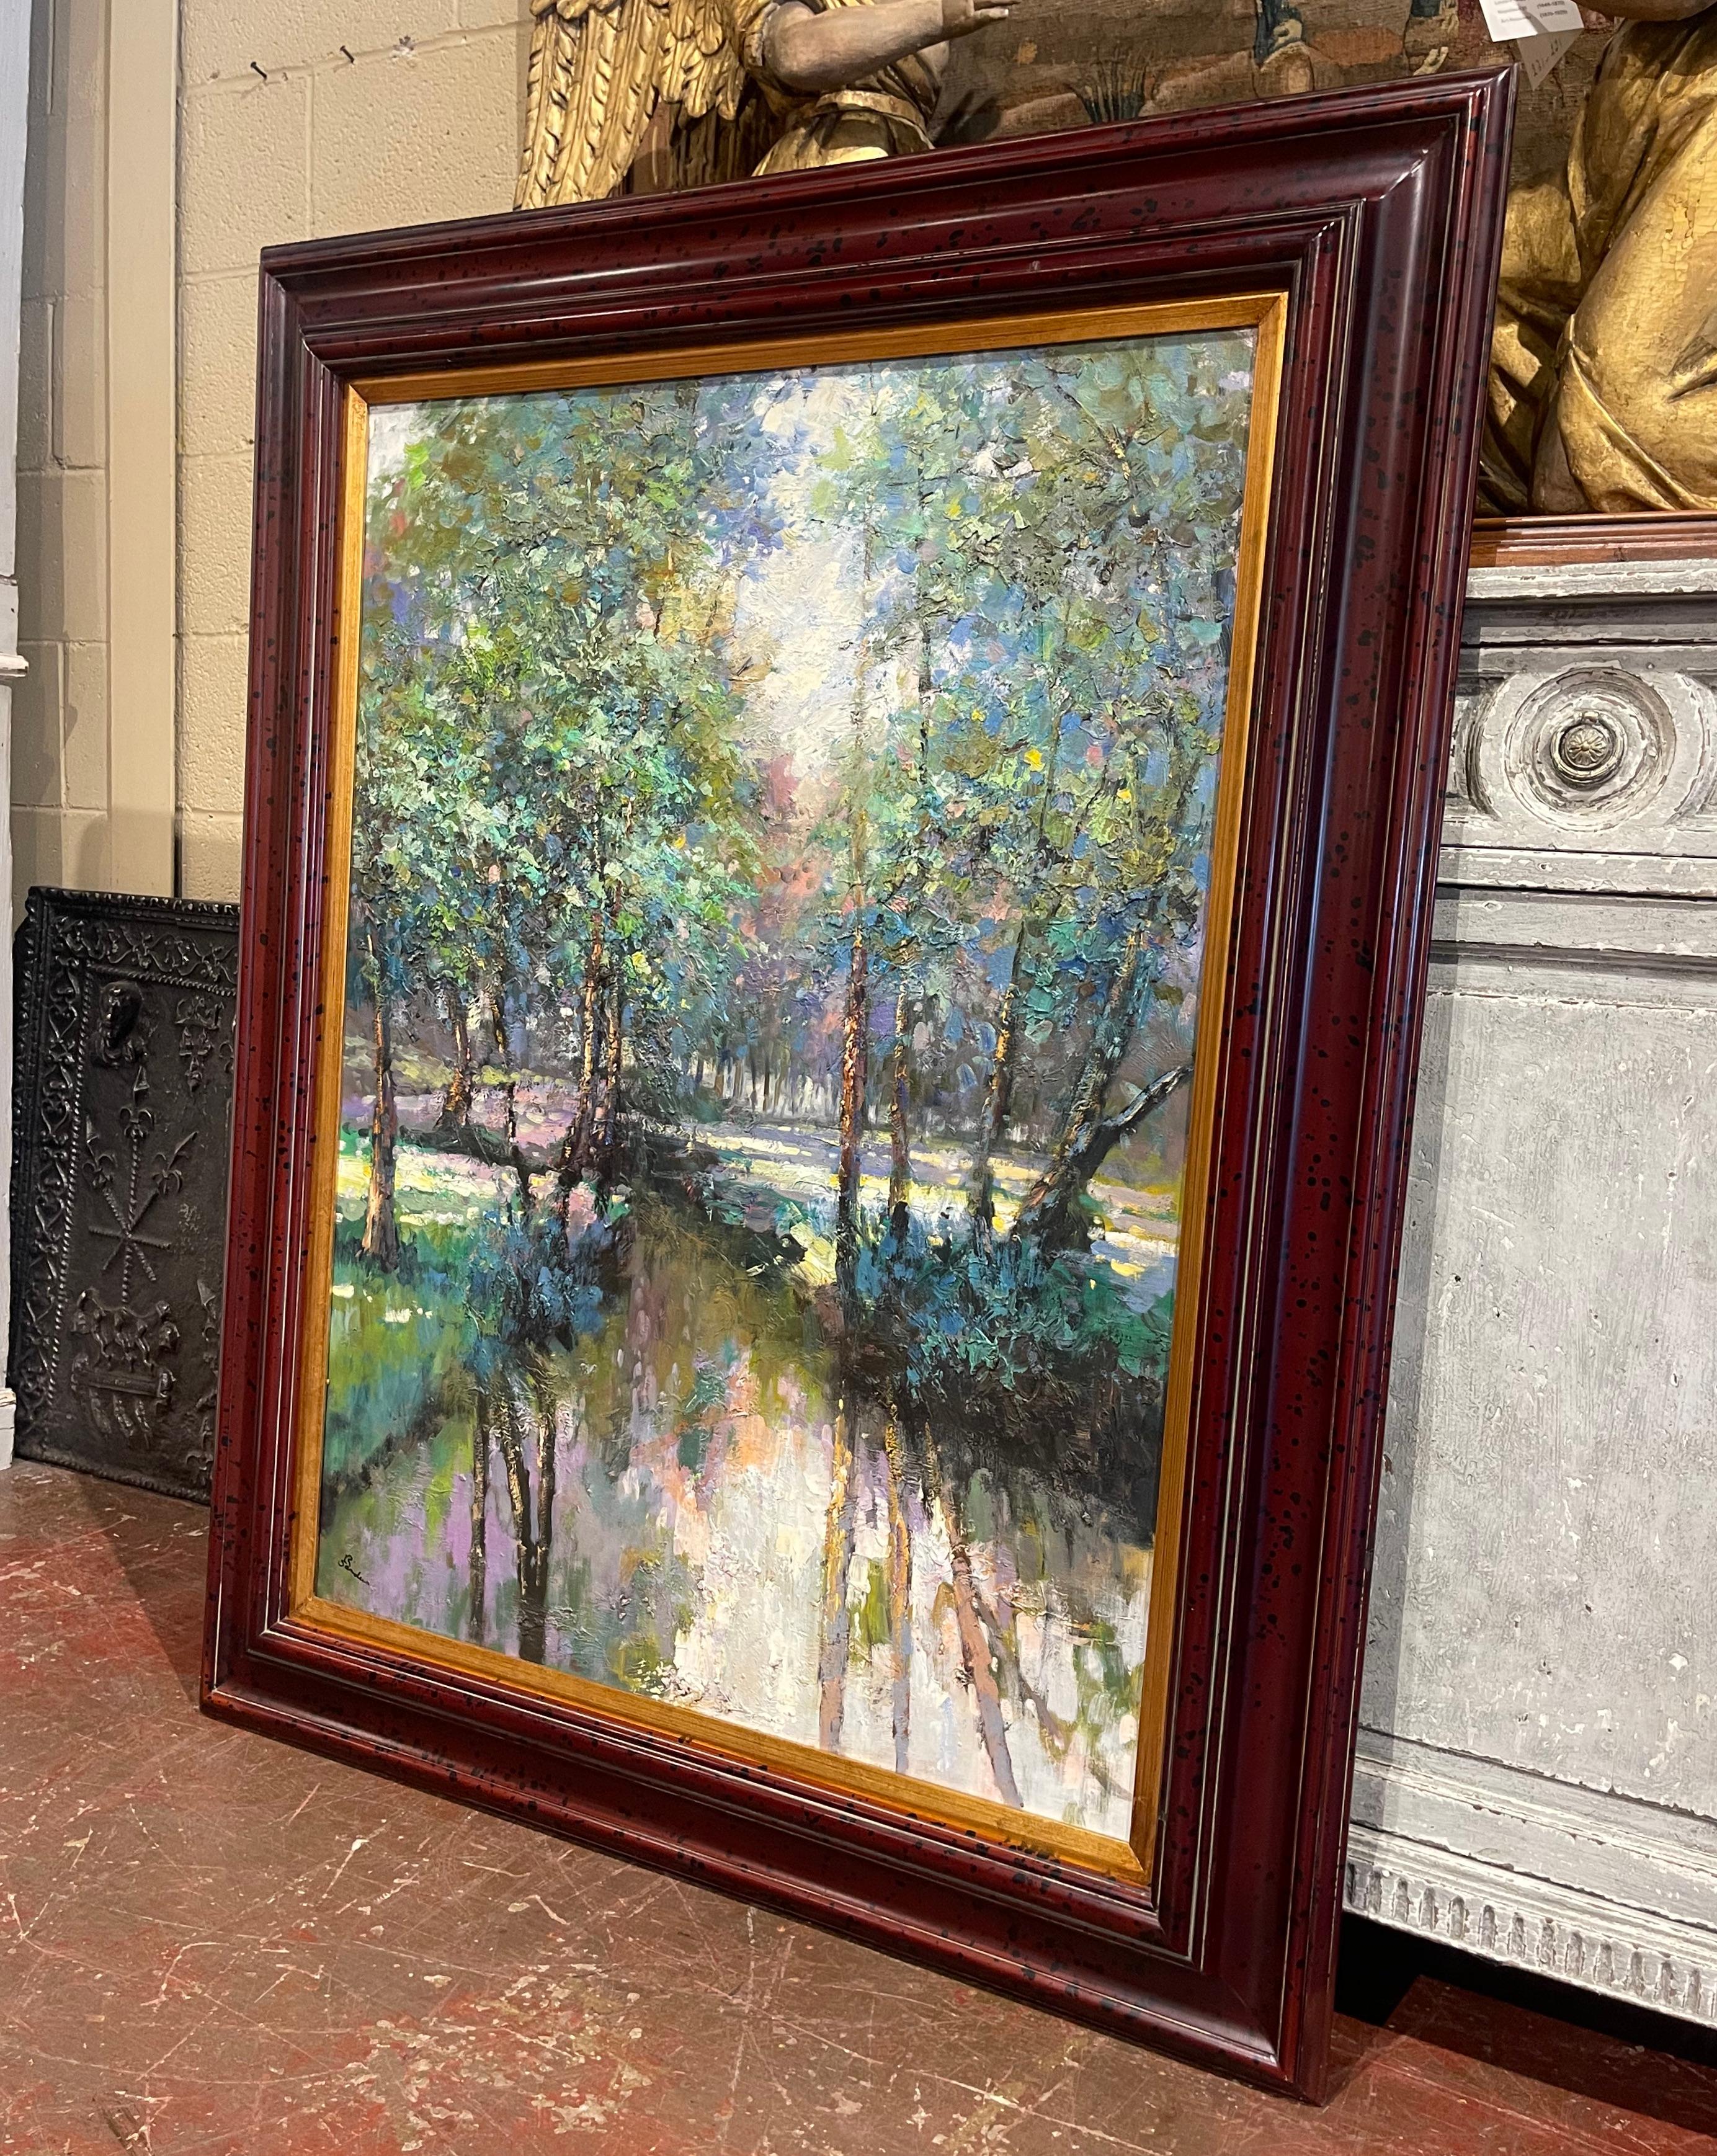 Decorate a living room, study or bedroom with this elegant and colorful landscape painting. Signed by the artist, R. Sanders in the lower left corner, the captivating work of art showcases a vibrant forest, meticulously hand-painted with intricate